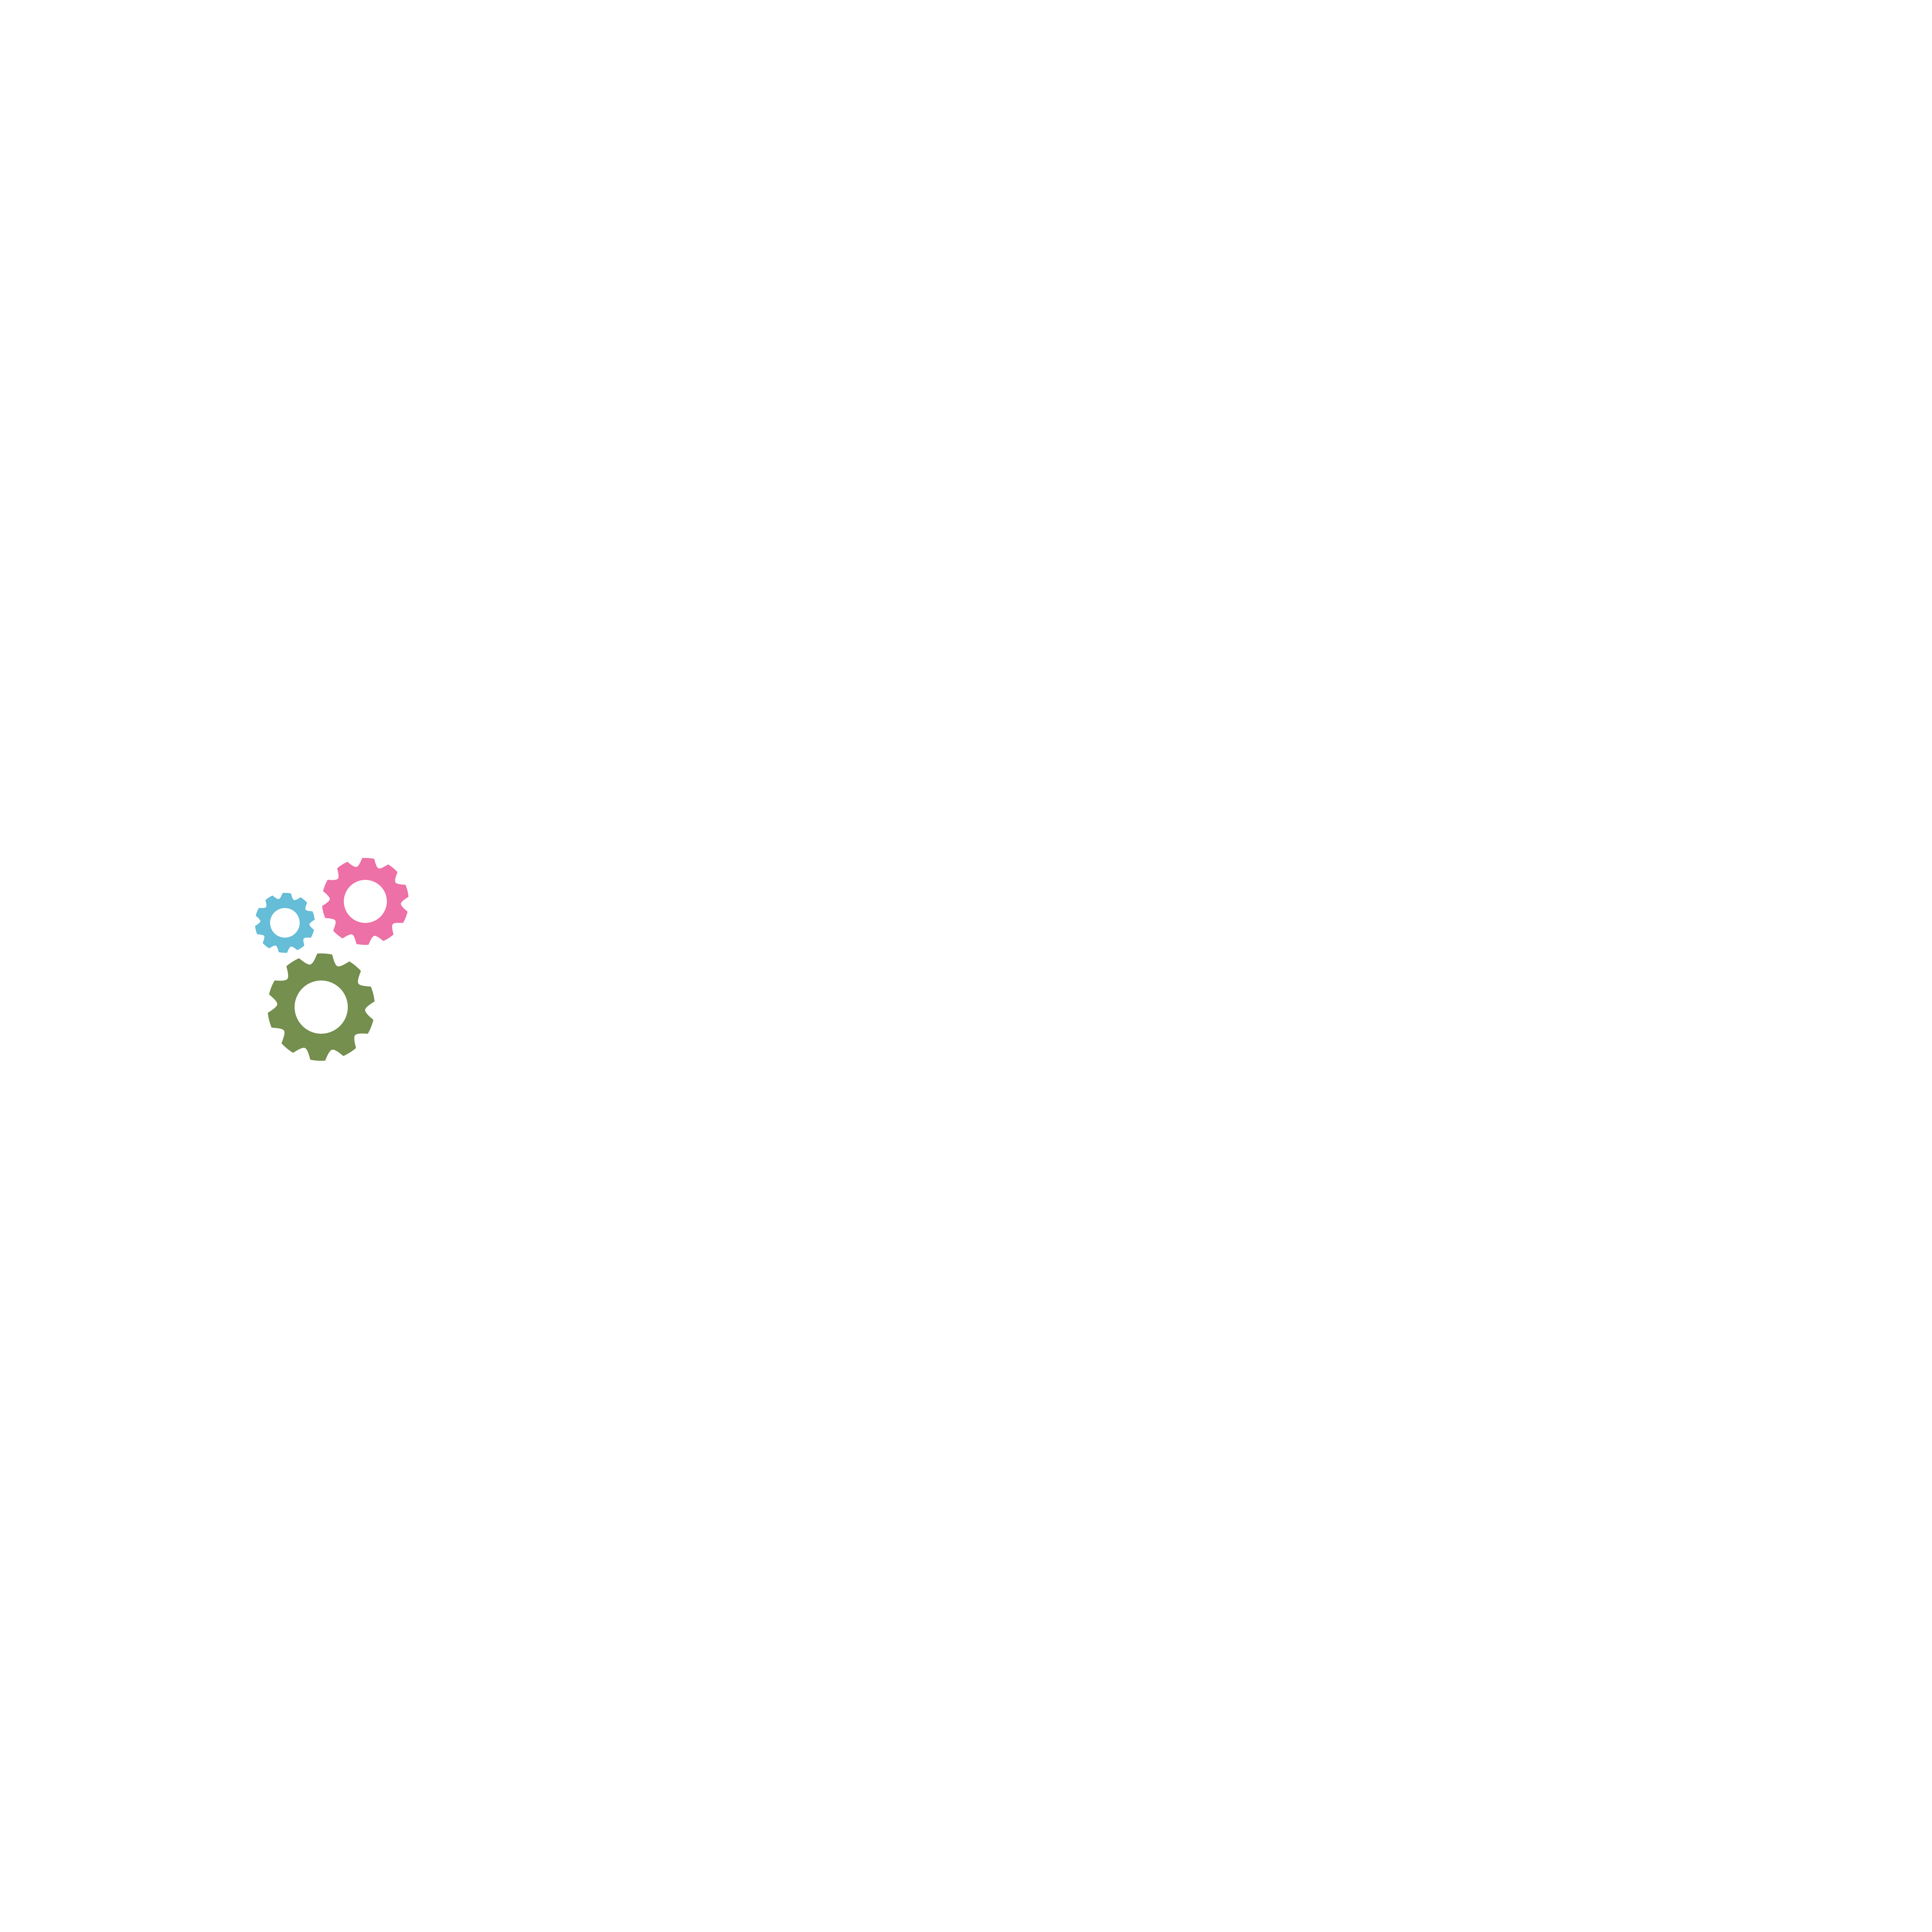 logo for The Community Connections Education & Wellbeing Group Ltd